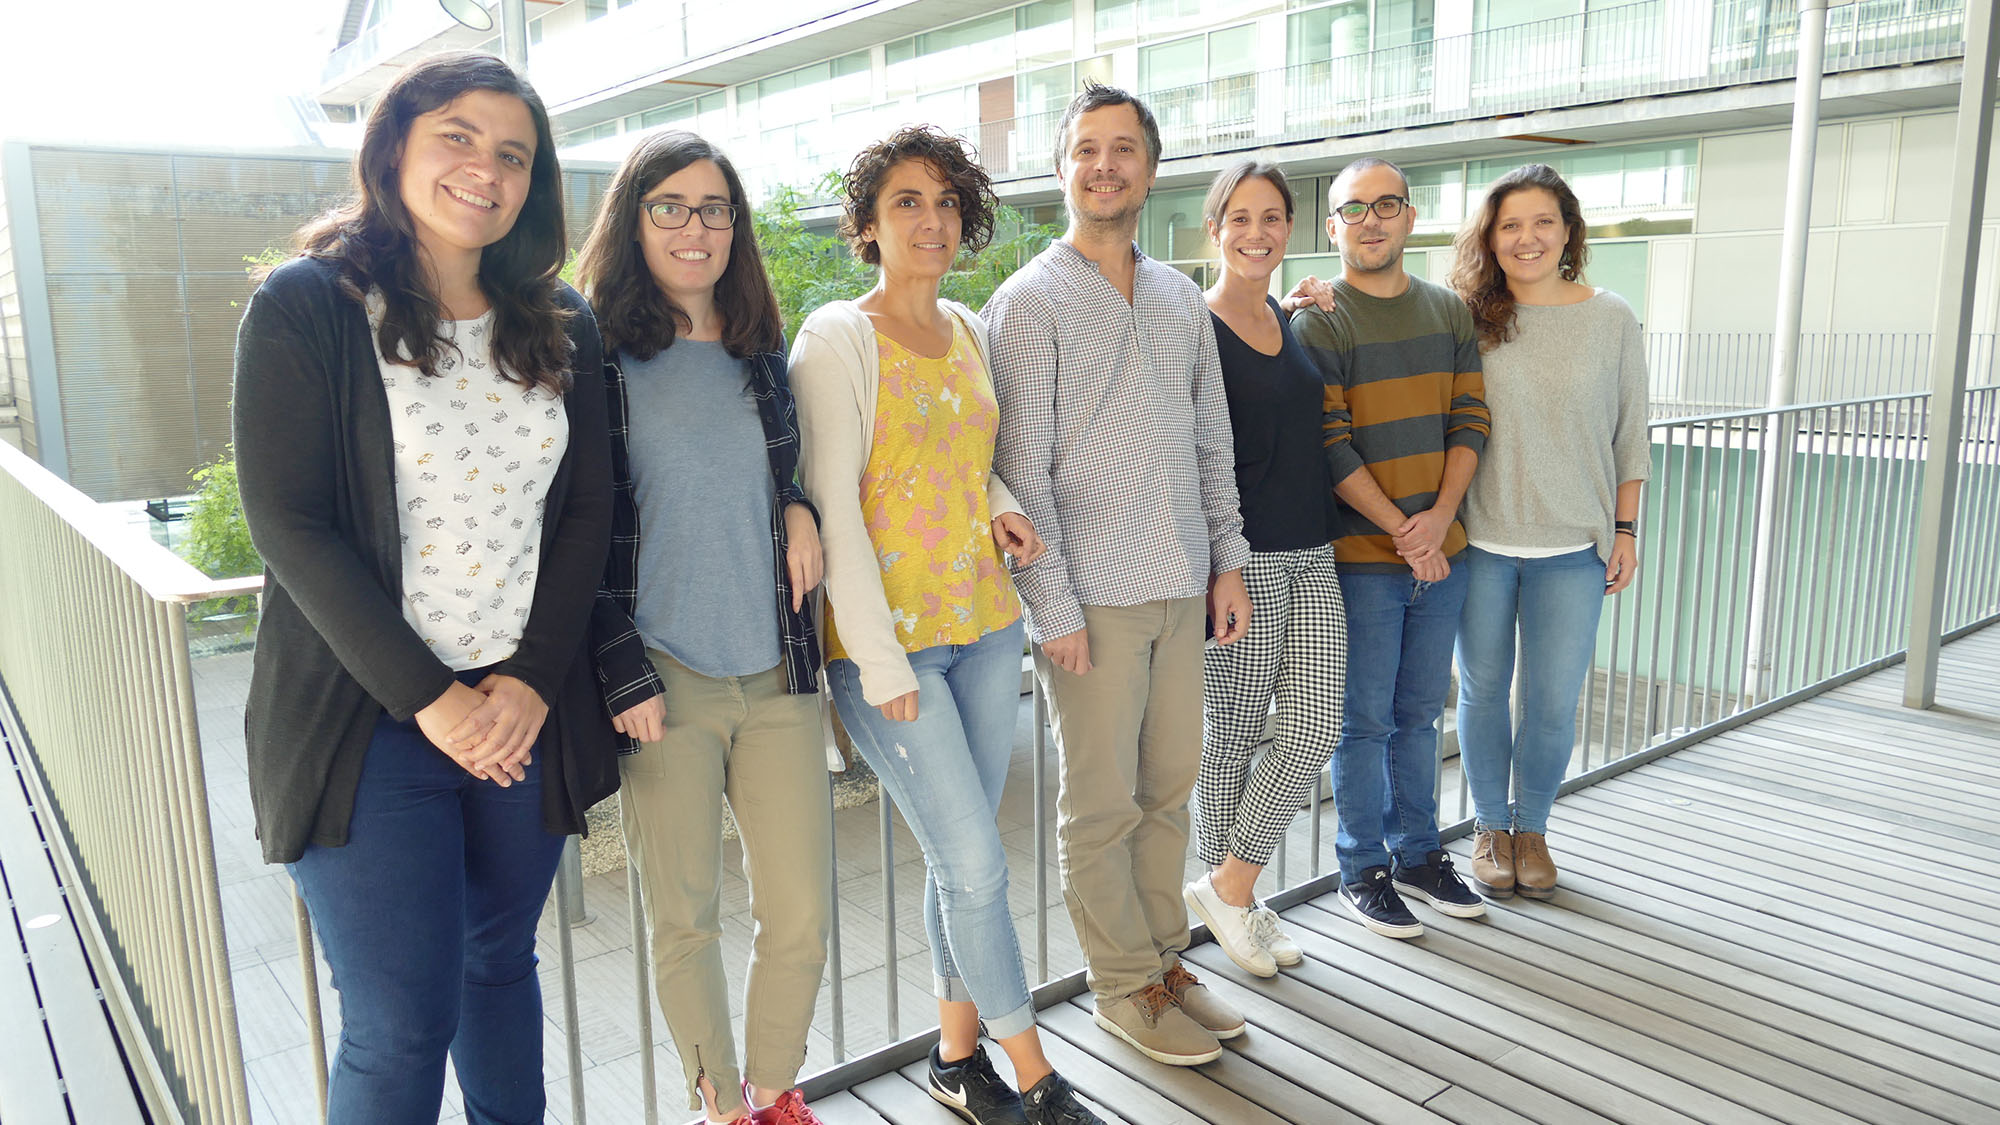 The research team led by Júlvez at ISGlobal studies the benefits of a correct diet